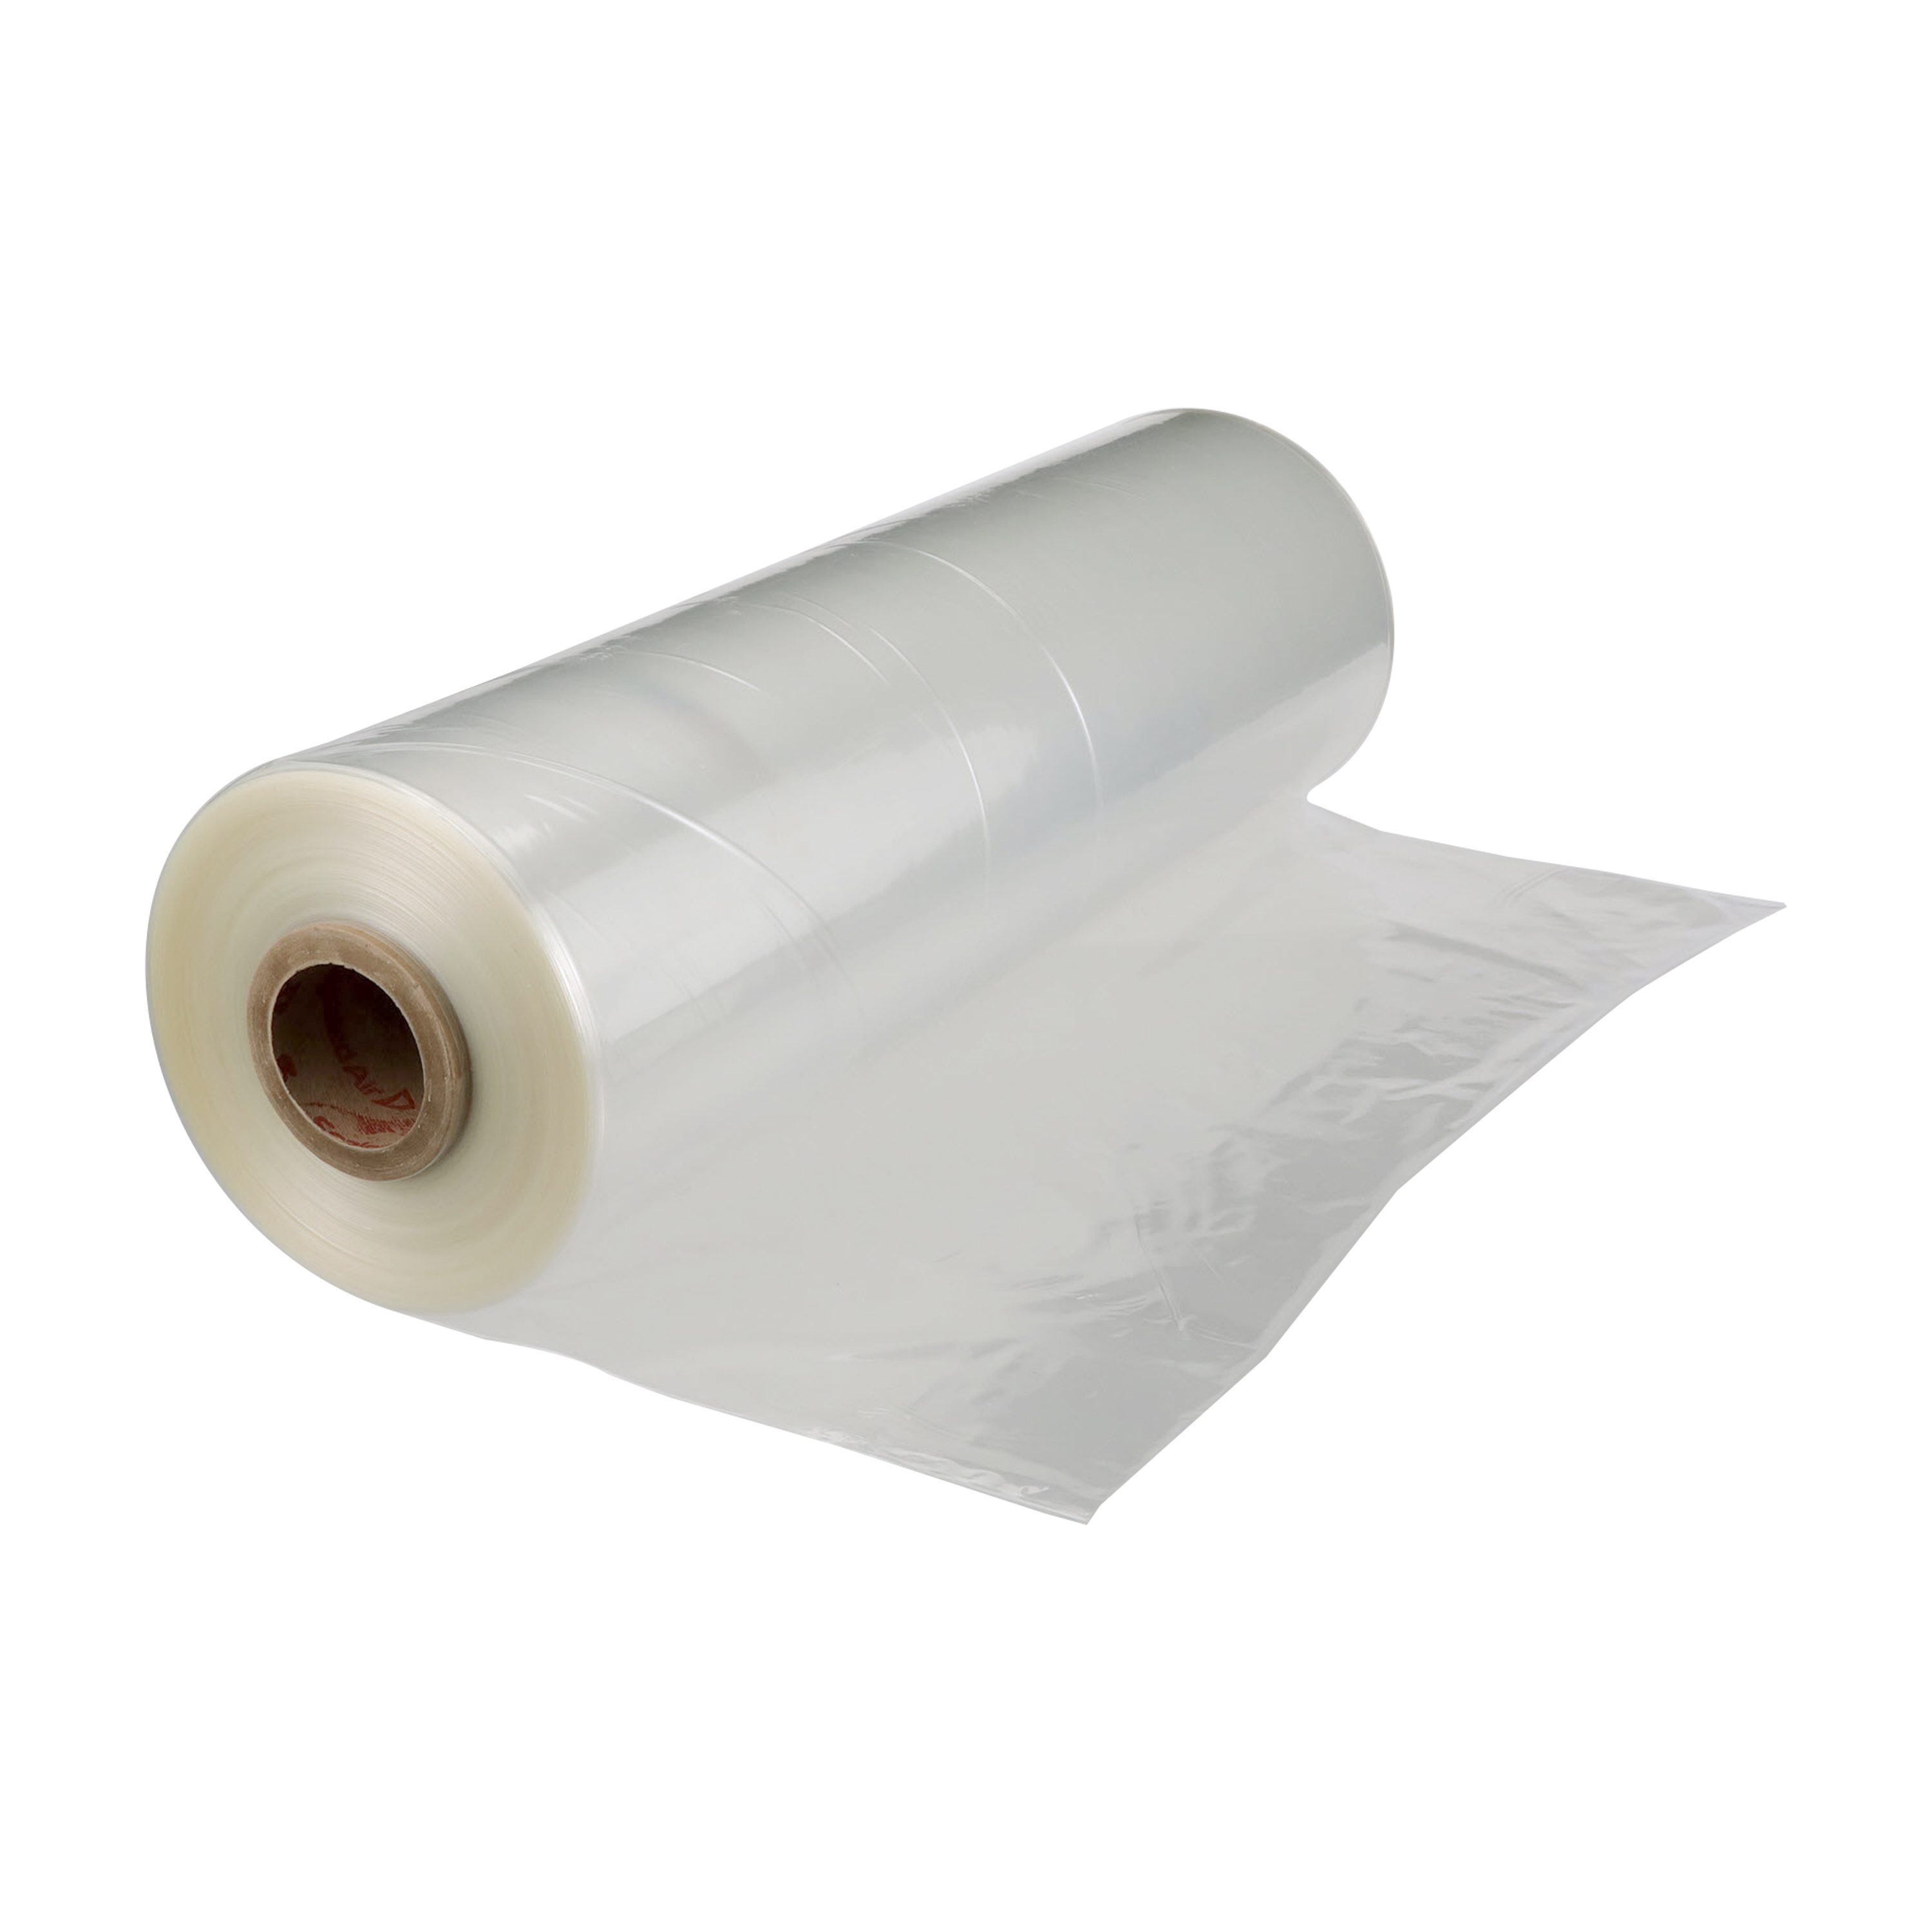 Easy-Open Shrink Bags - Sealed Air